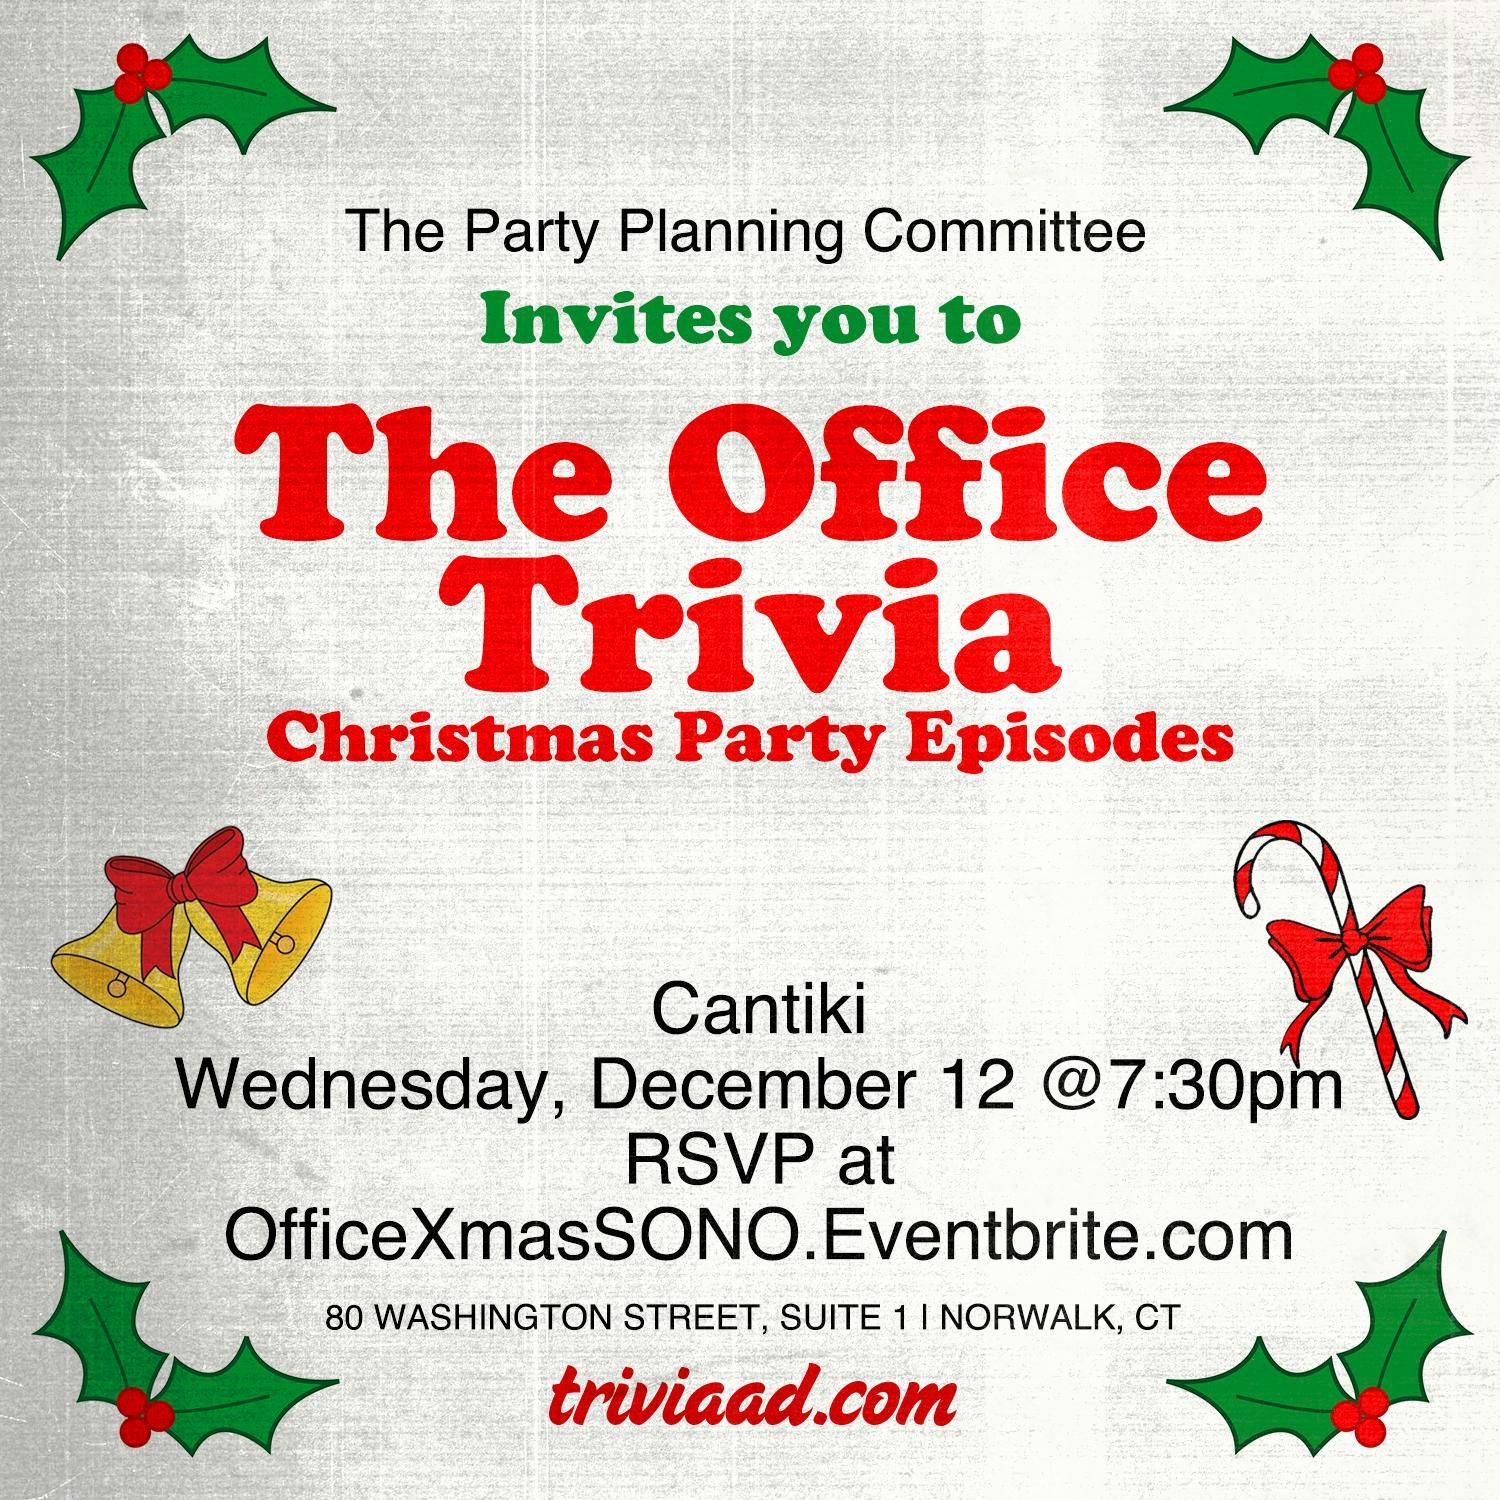 The Office Trivia: Christmas Party Episodes